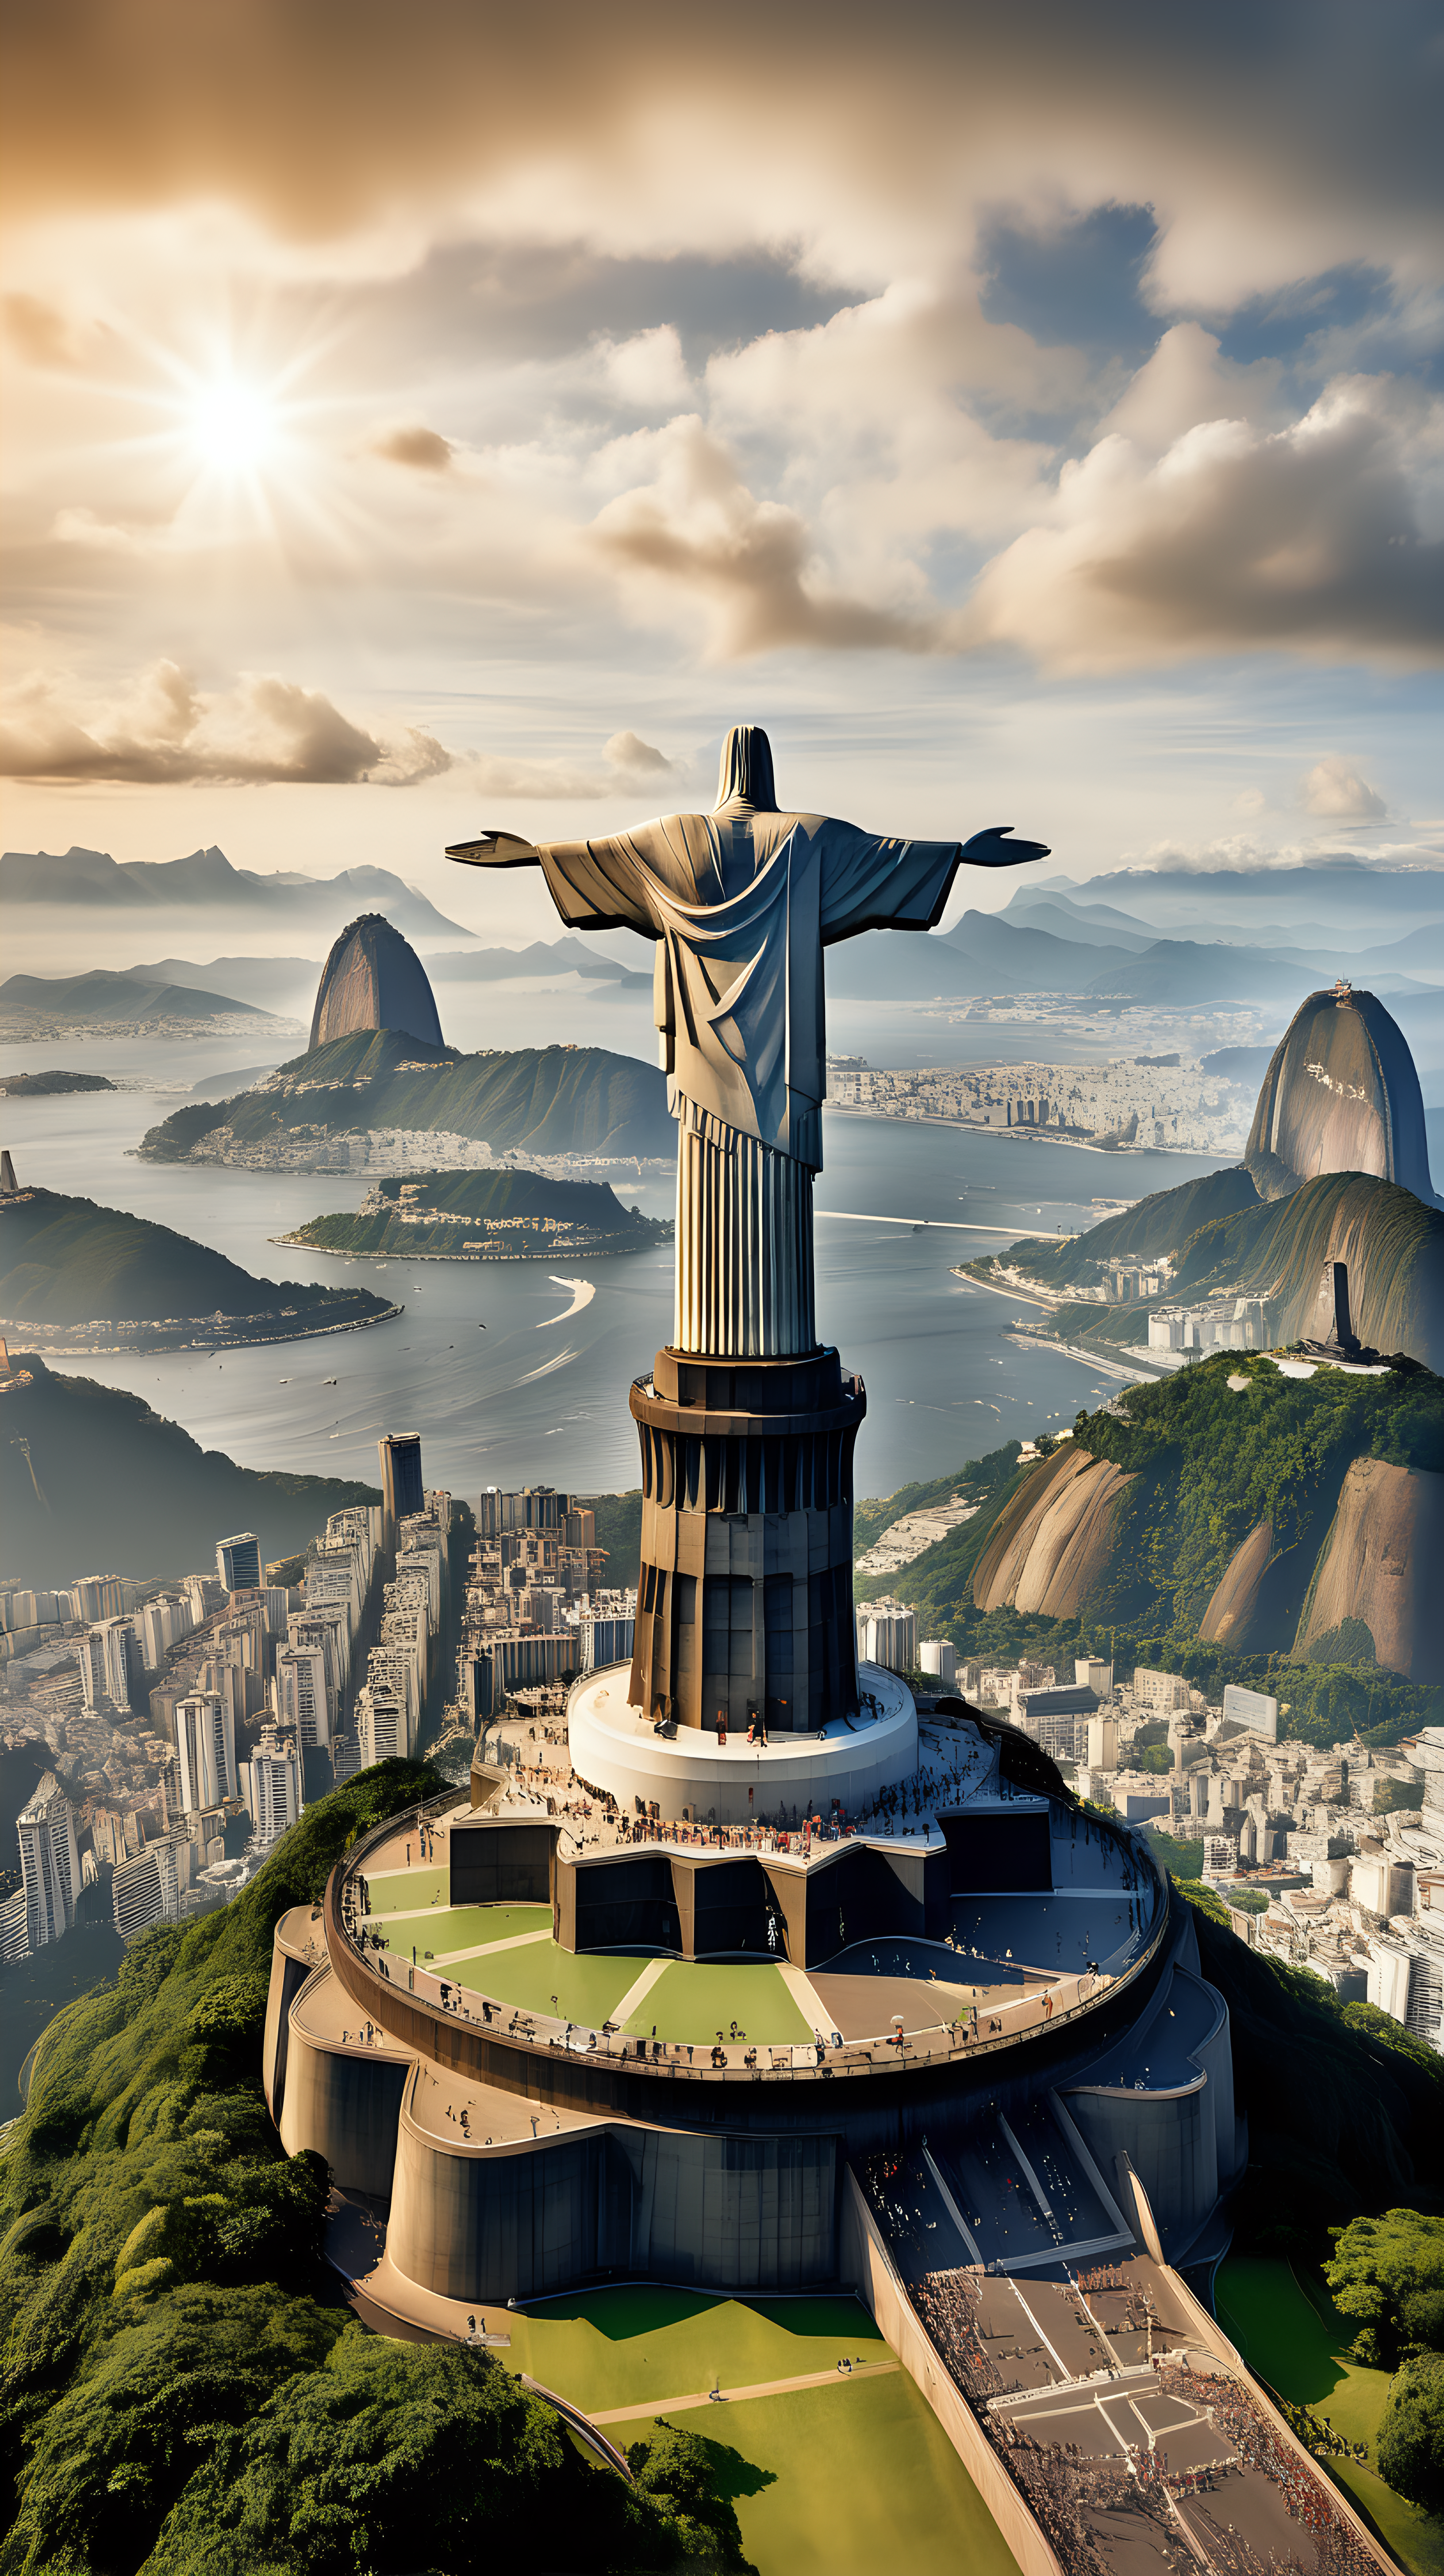 Imagine we're prompting, a beautiful trivia background centered around the iconic Christ the Redeemer statue. Capture the details of this monumental world wonder using a high-quality camera model and lens. Illuminate the scene with balanced and natural lighting, ensuring a universally usable and visually appealing composition for a captivating geography trivia backdrop.